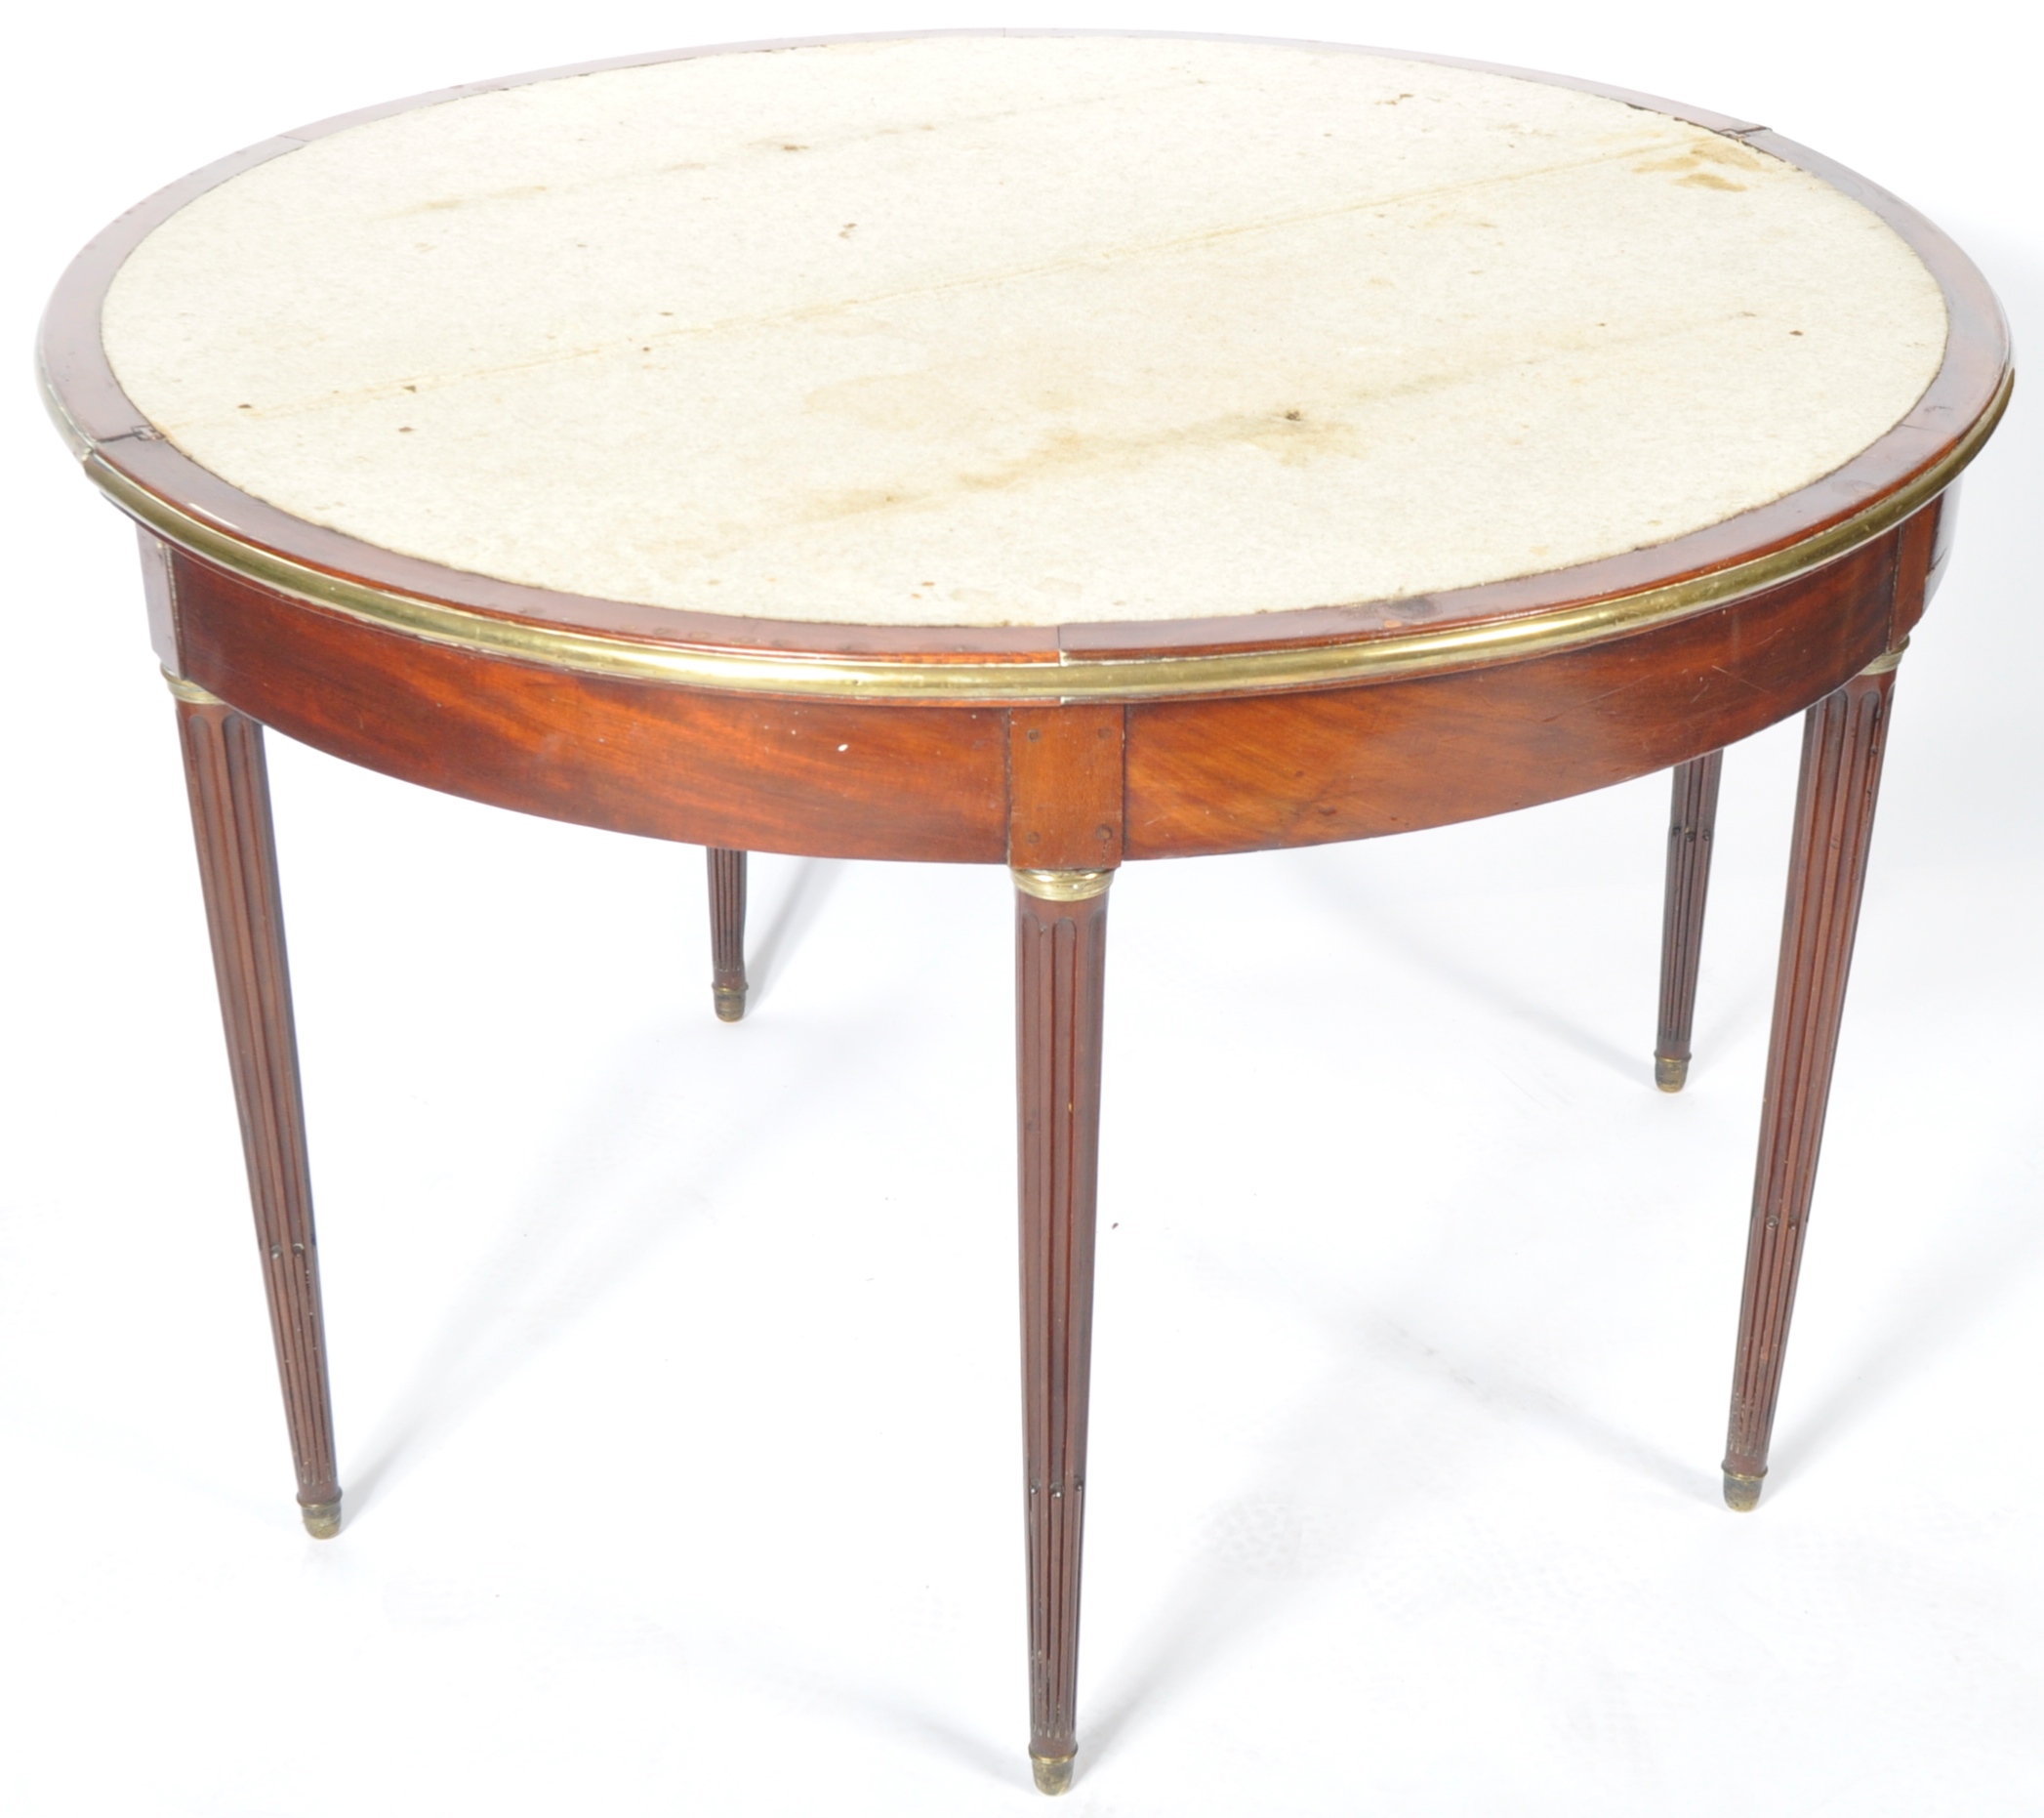 EARLY 20TH CENTURY FRENCH EMPIRE BRASS AND MAHOGANY CARD TABLE - Image 6 of 7